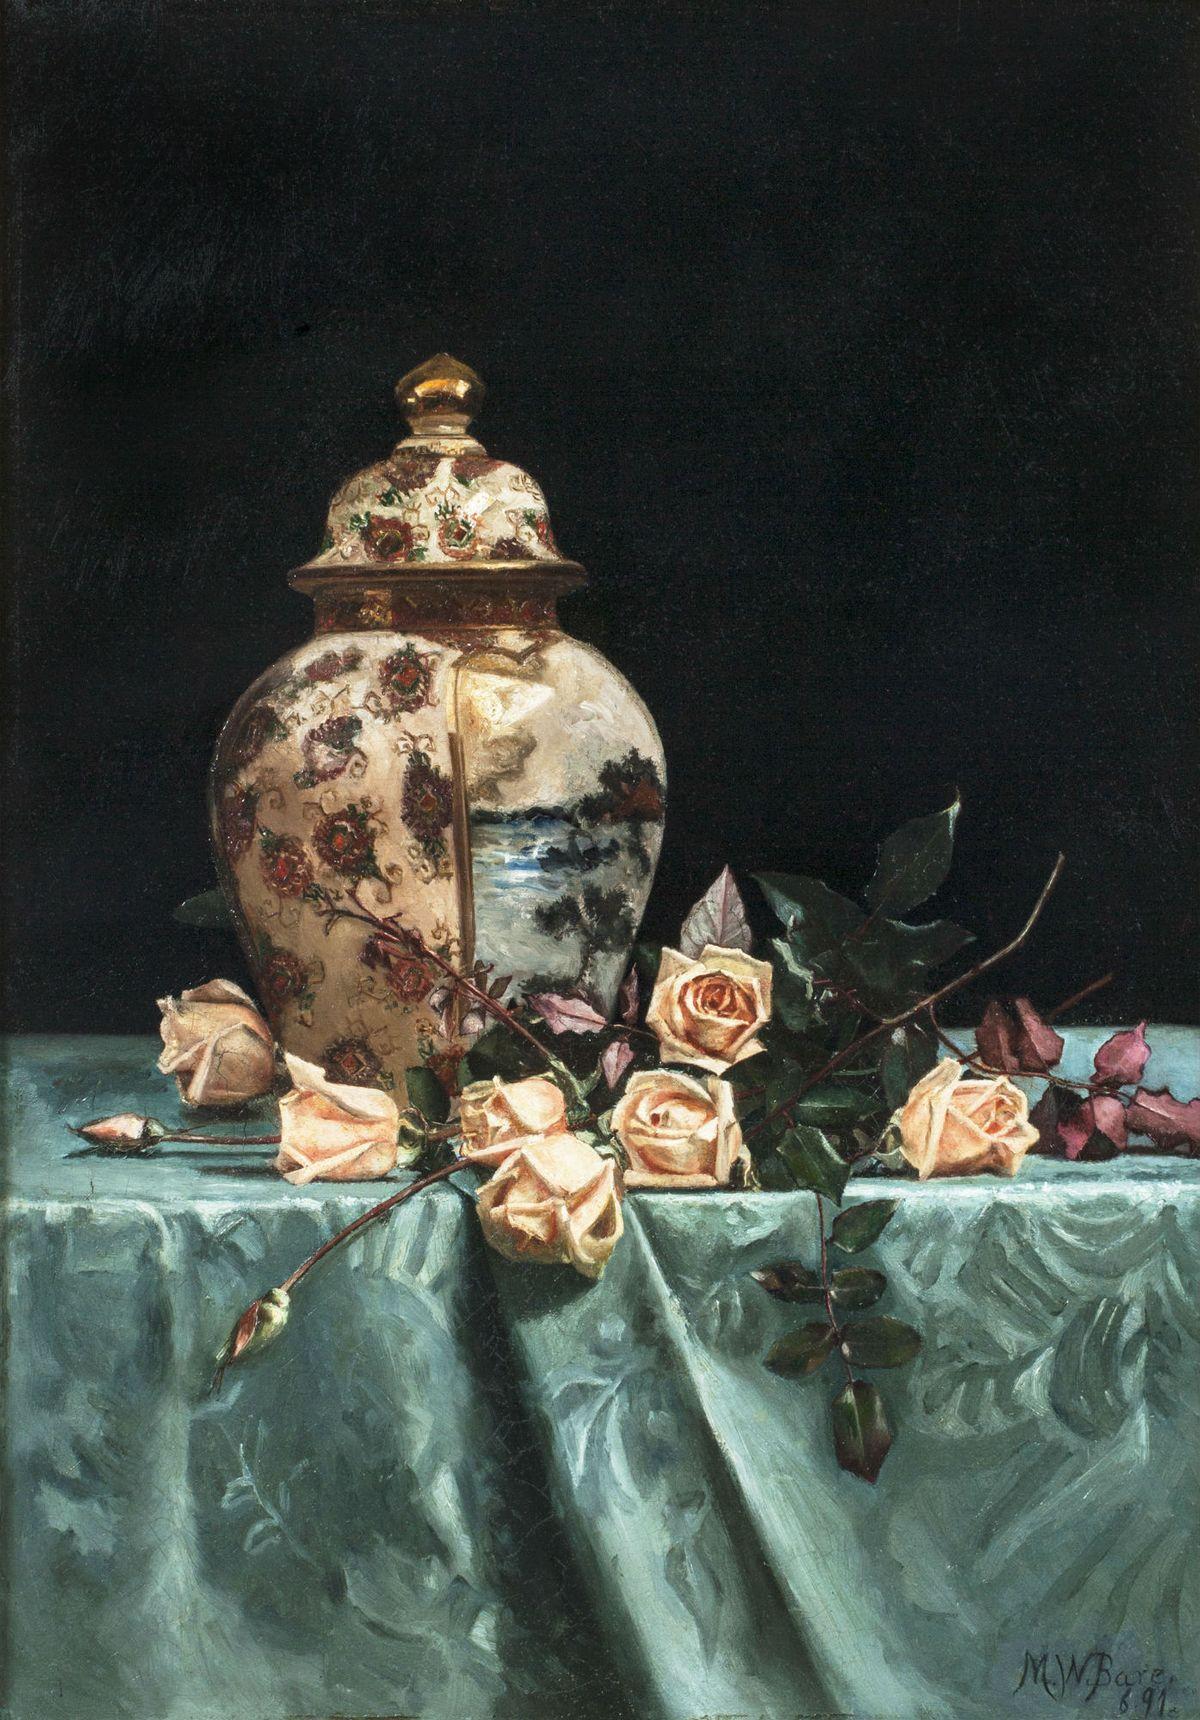 Still life with roses by historic woman artist Martha Bare

MARTHA BARE (1864-1940)
Still Life with Roses, 1891
Oil on canvas
29 x 20 ½ inches
Signed lower right